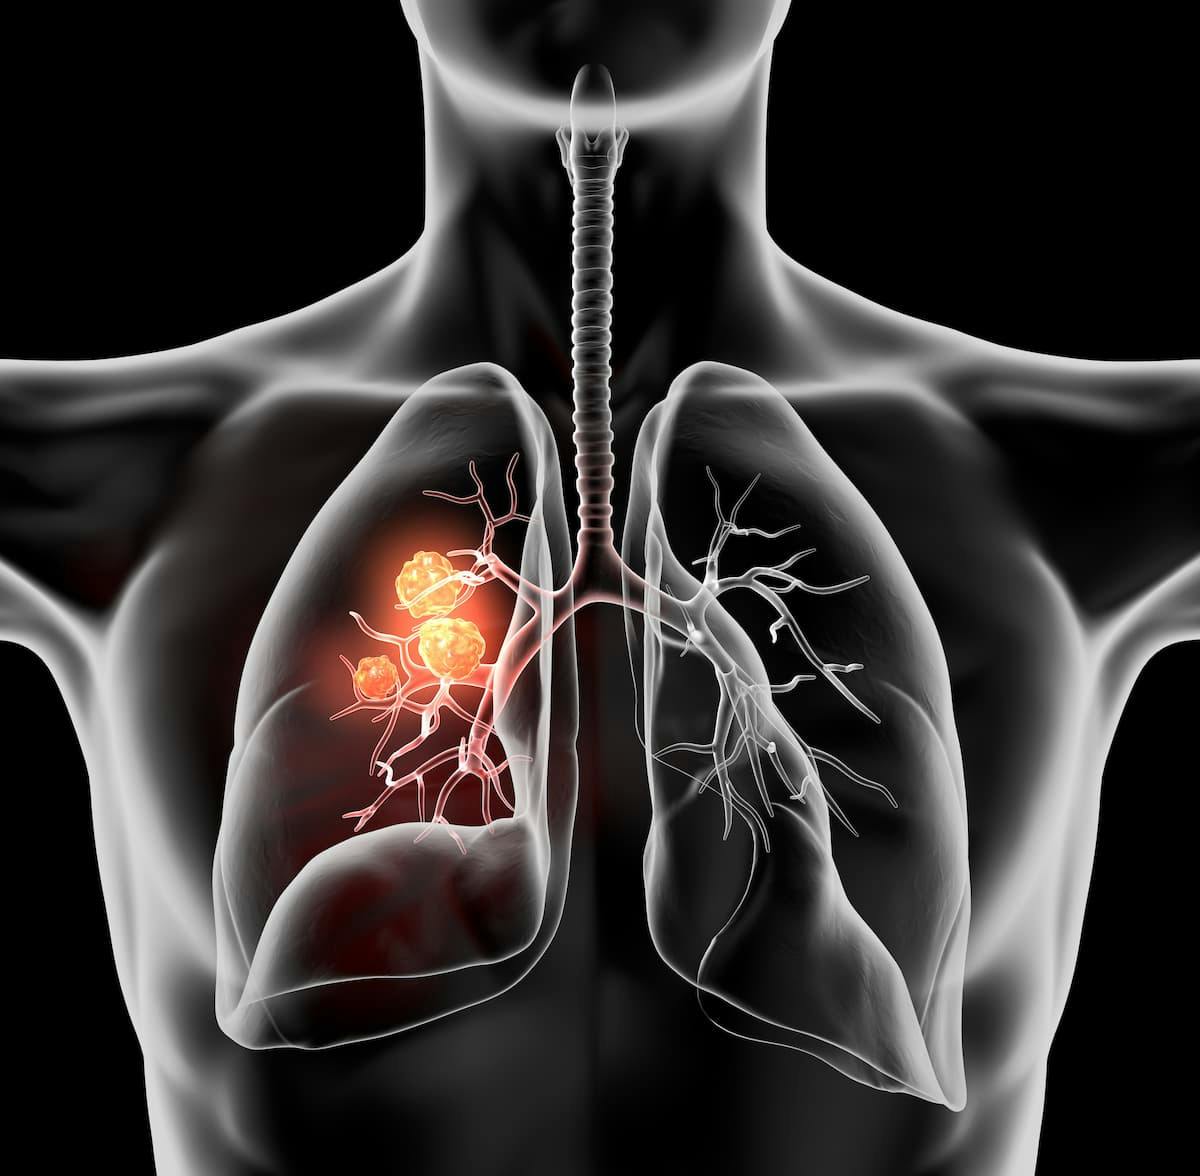 Findings from the phase 3 ORIENT-31 trial support the use of sintilimab plus chemotherapy as a potential novel treatment strategy for those with EGFR-mutated nonsquamous non–small cell lung cancer.